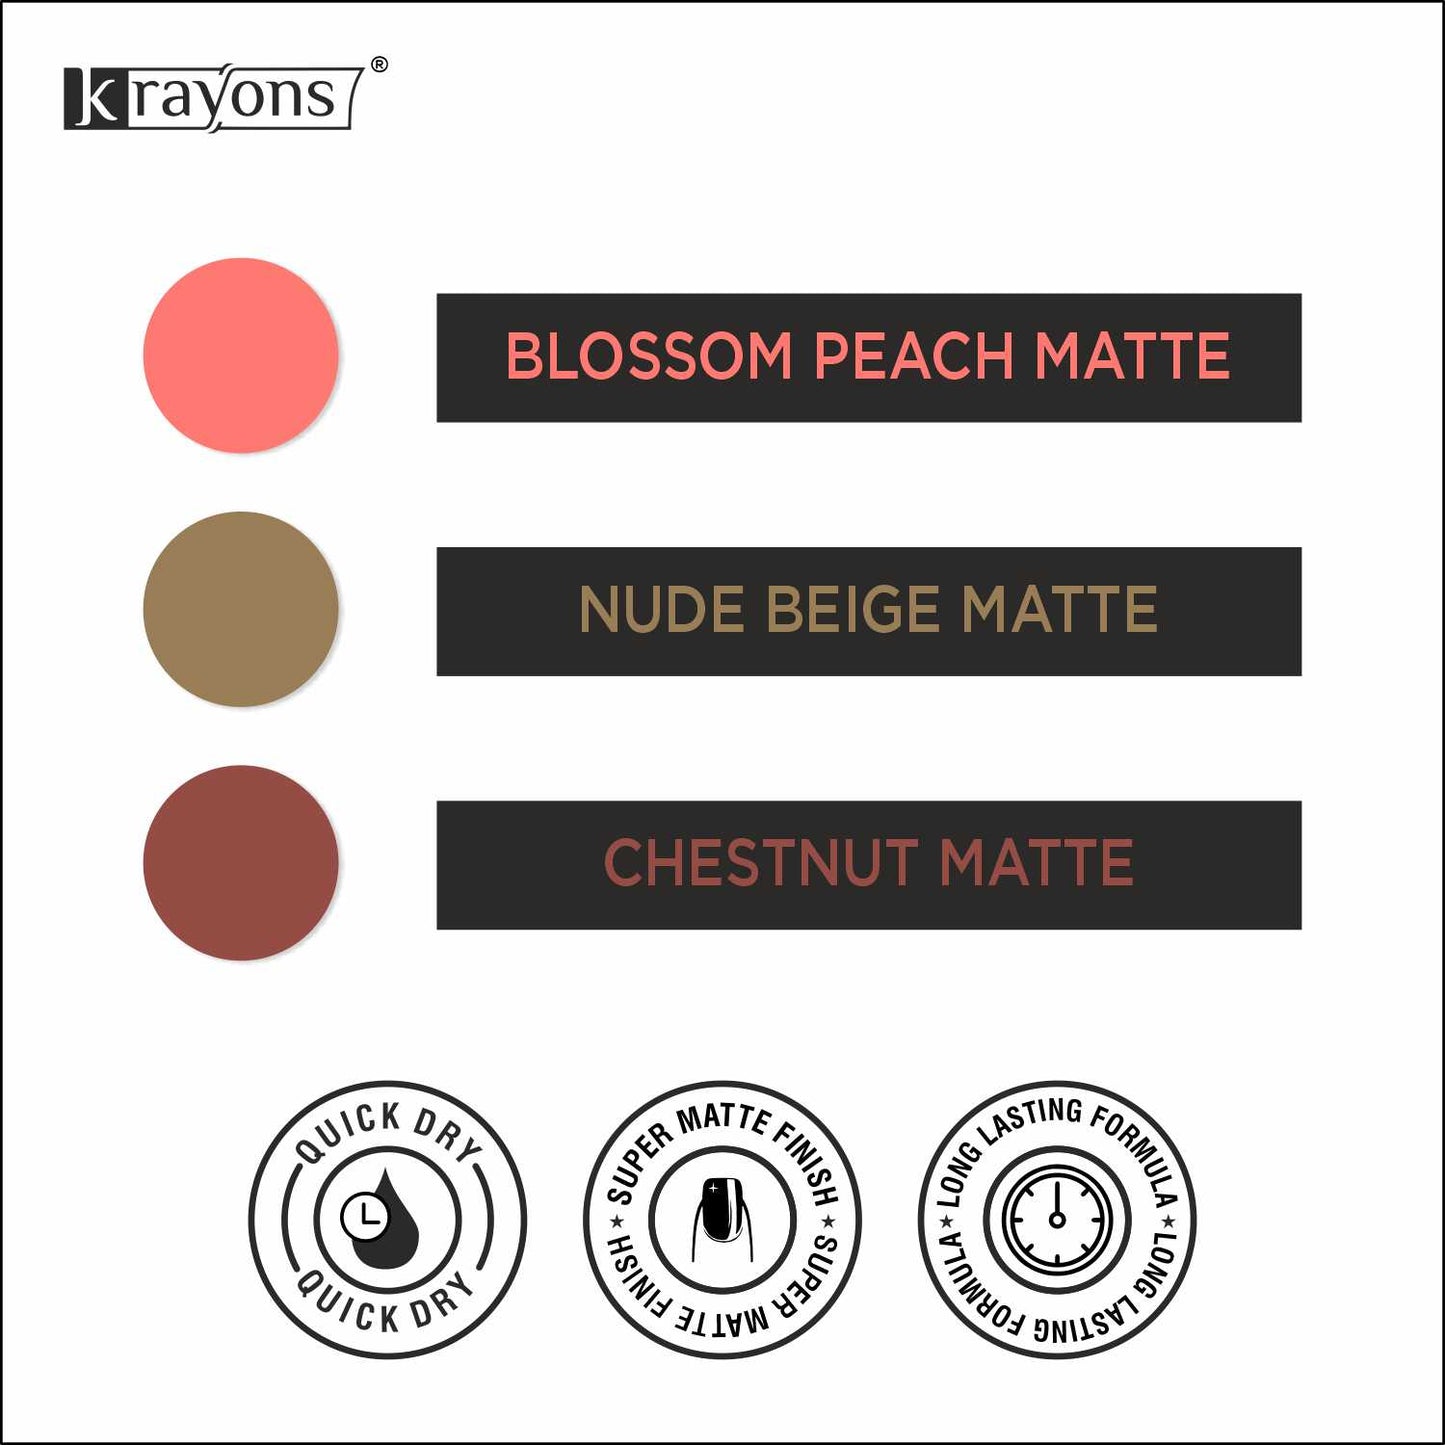 Krayons Cute Super Matte Finish Nail Enamel, Quick Dry, LongLasting, Blossom Peach, Nude Beige, Chestnut Matte, 6ml Each (Pack of 3)